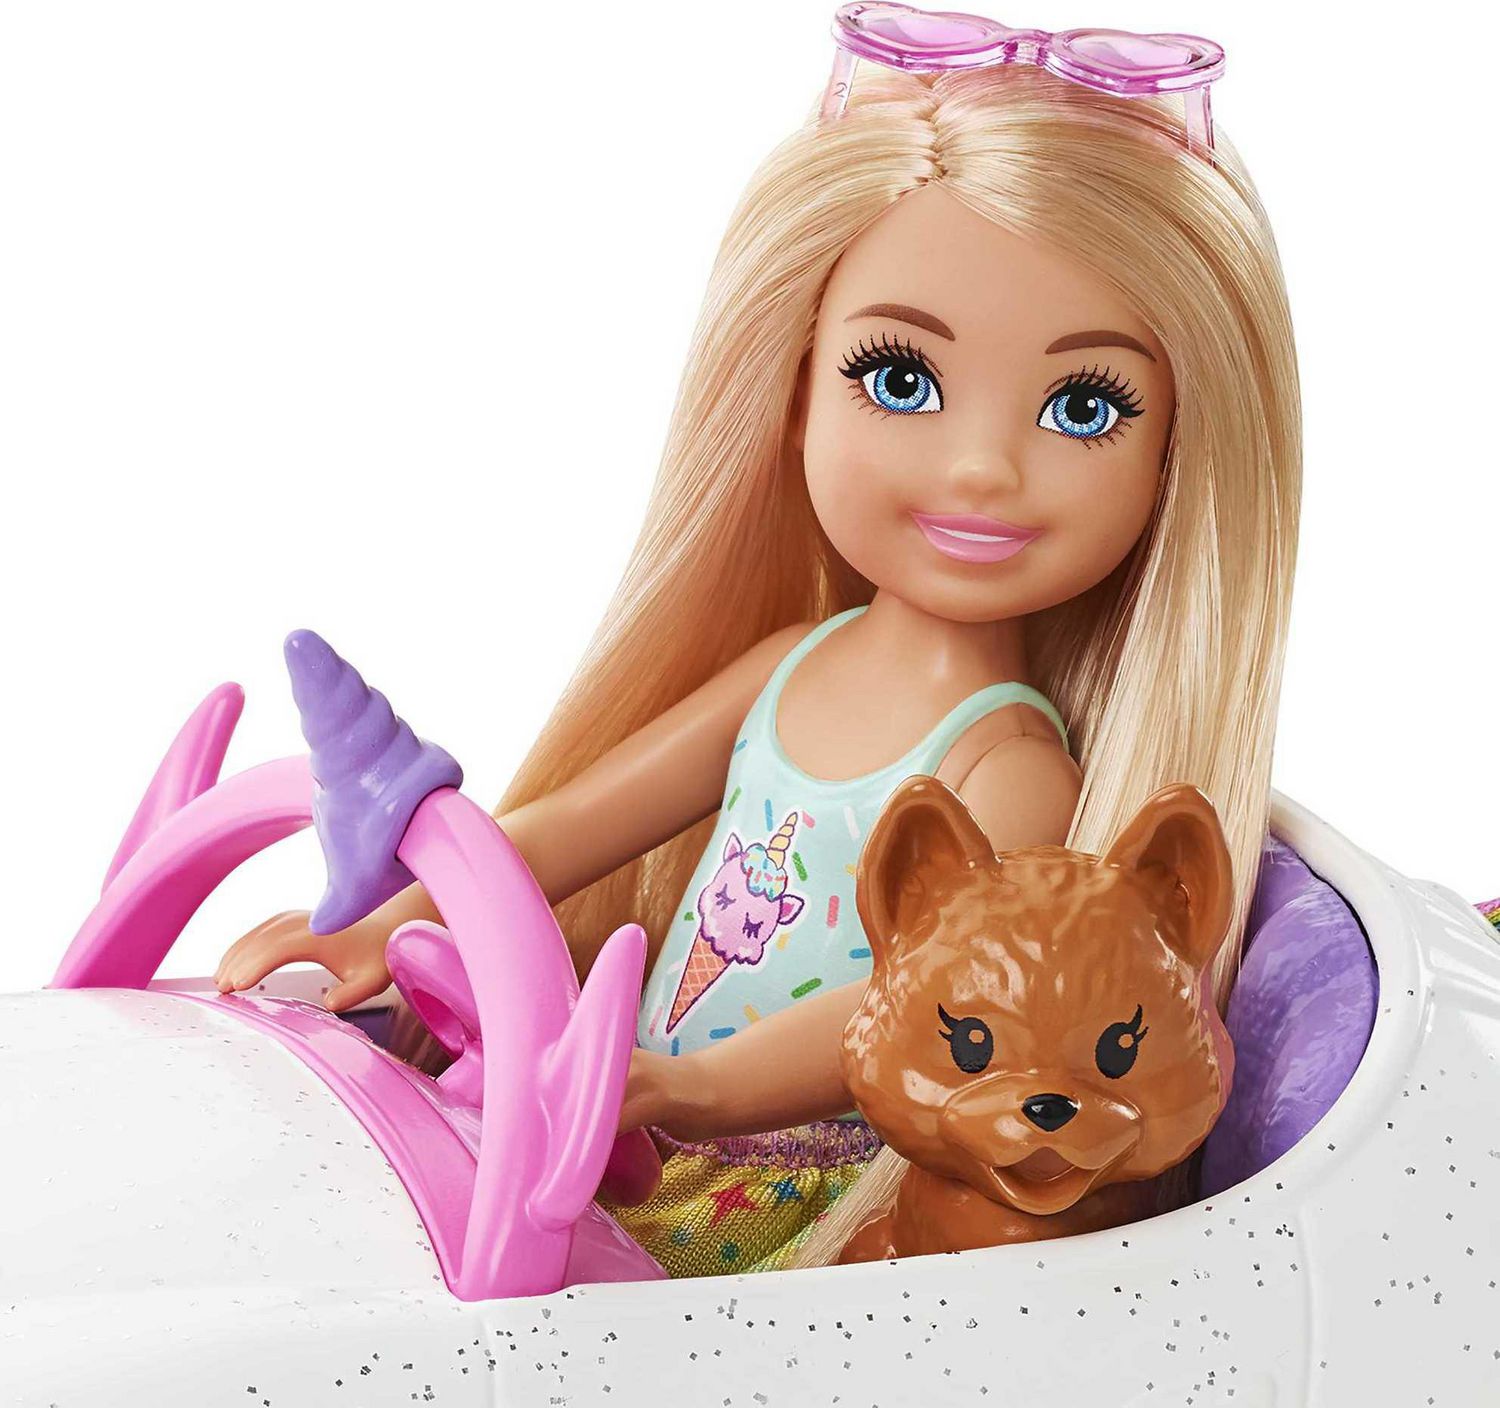 ​Barbie Club Chelsea Doll (6-inch Blonde) with Open-Top Rainbow  Unicorn-Themed Car, Pet Puppy, Sticker Sheet & Accessories